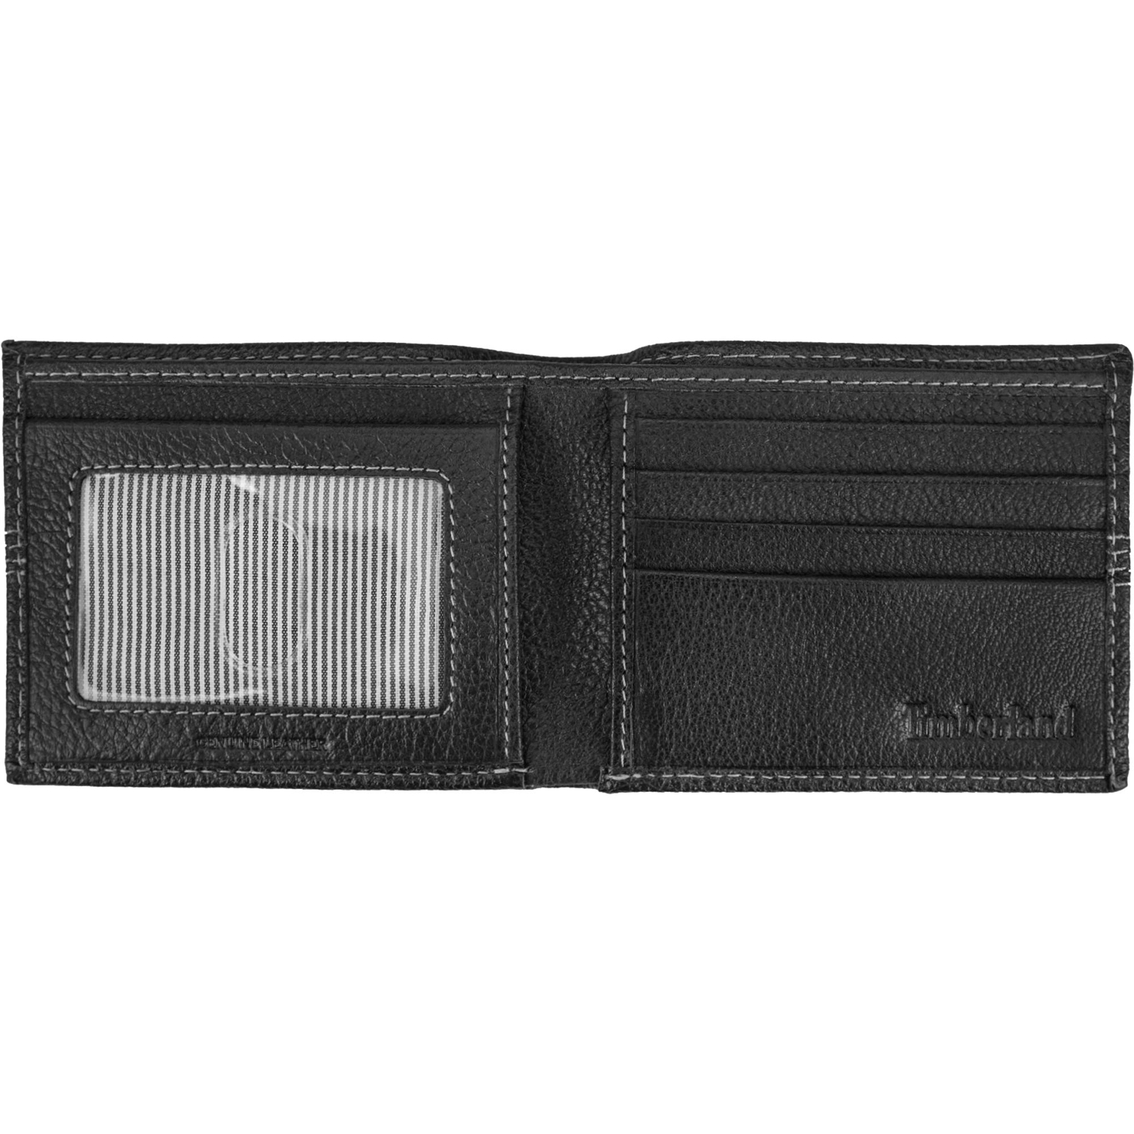 Timberland Leather Sportz Quad Billfold Wallet | Wallets | Clothing ...